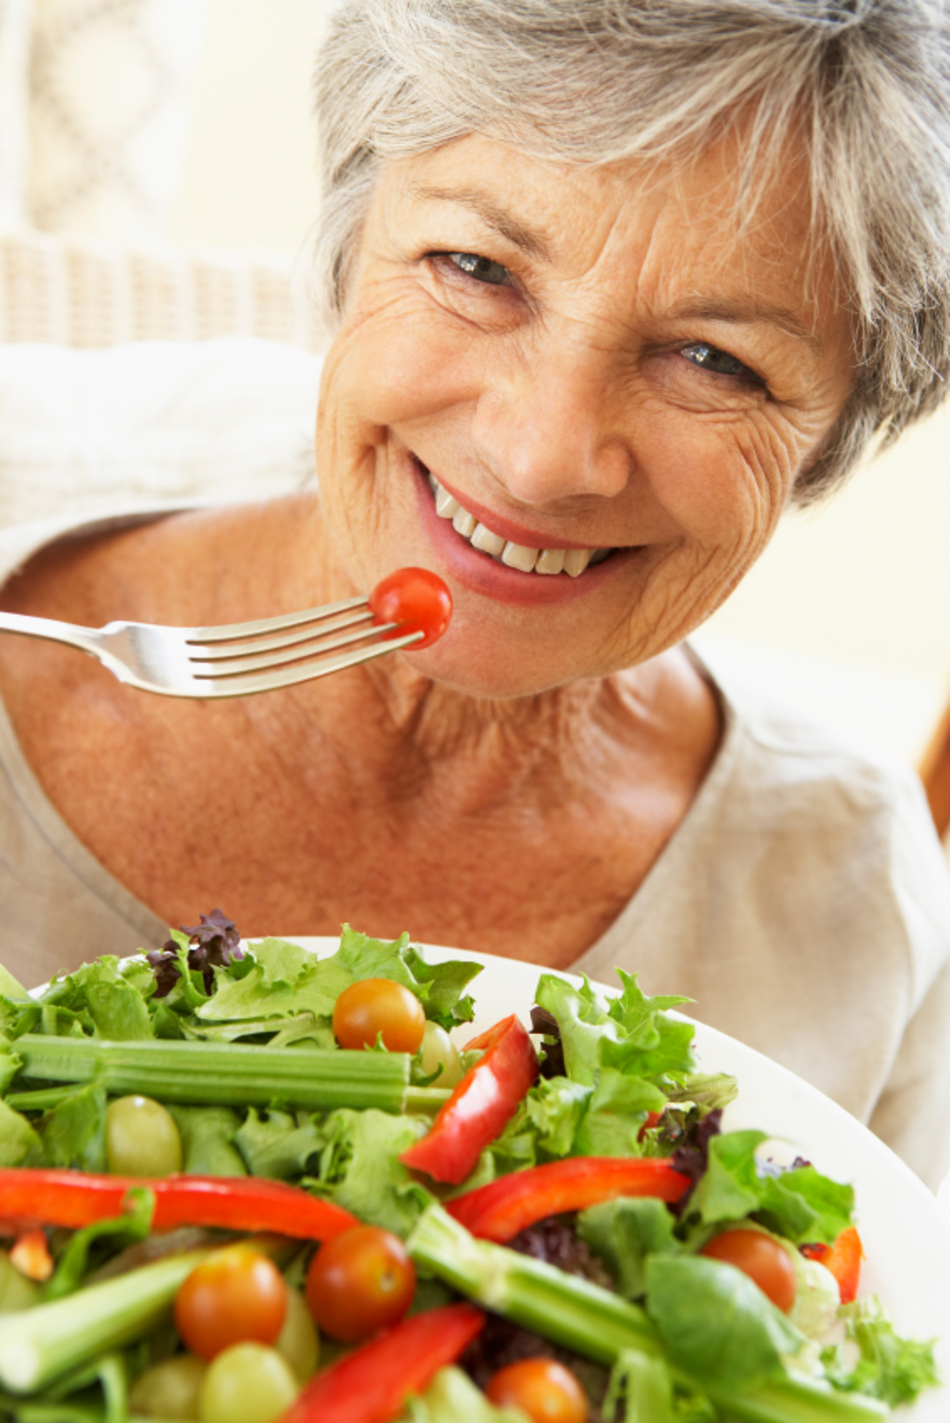 Proper Diet Is Critical for Patients with Liver Disease